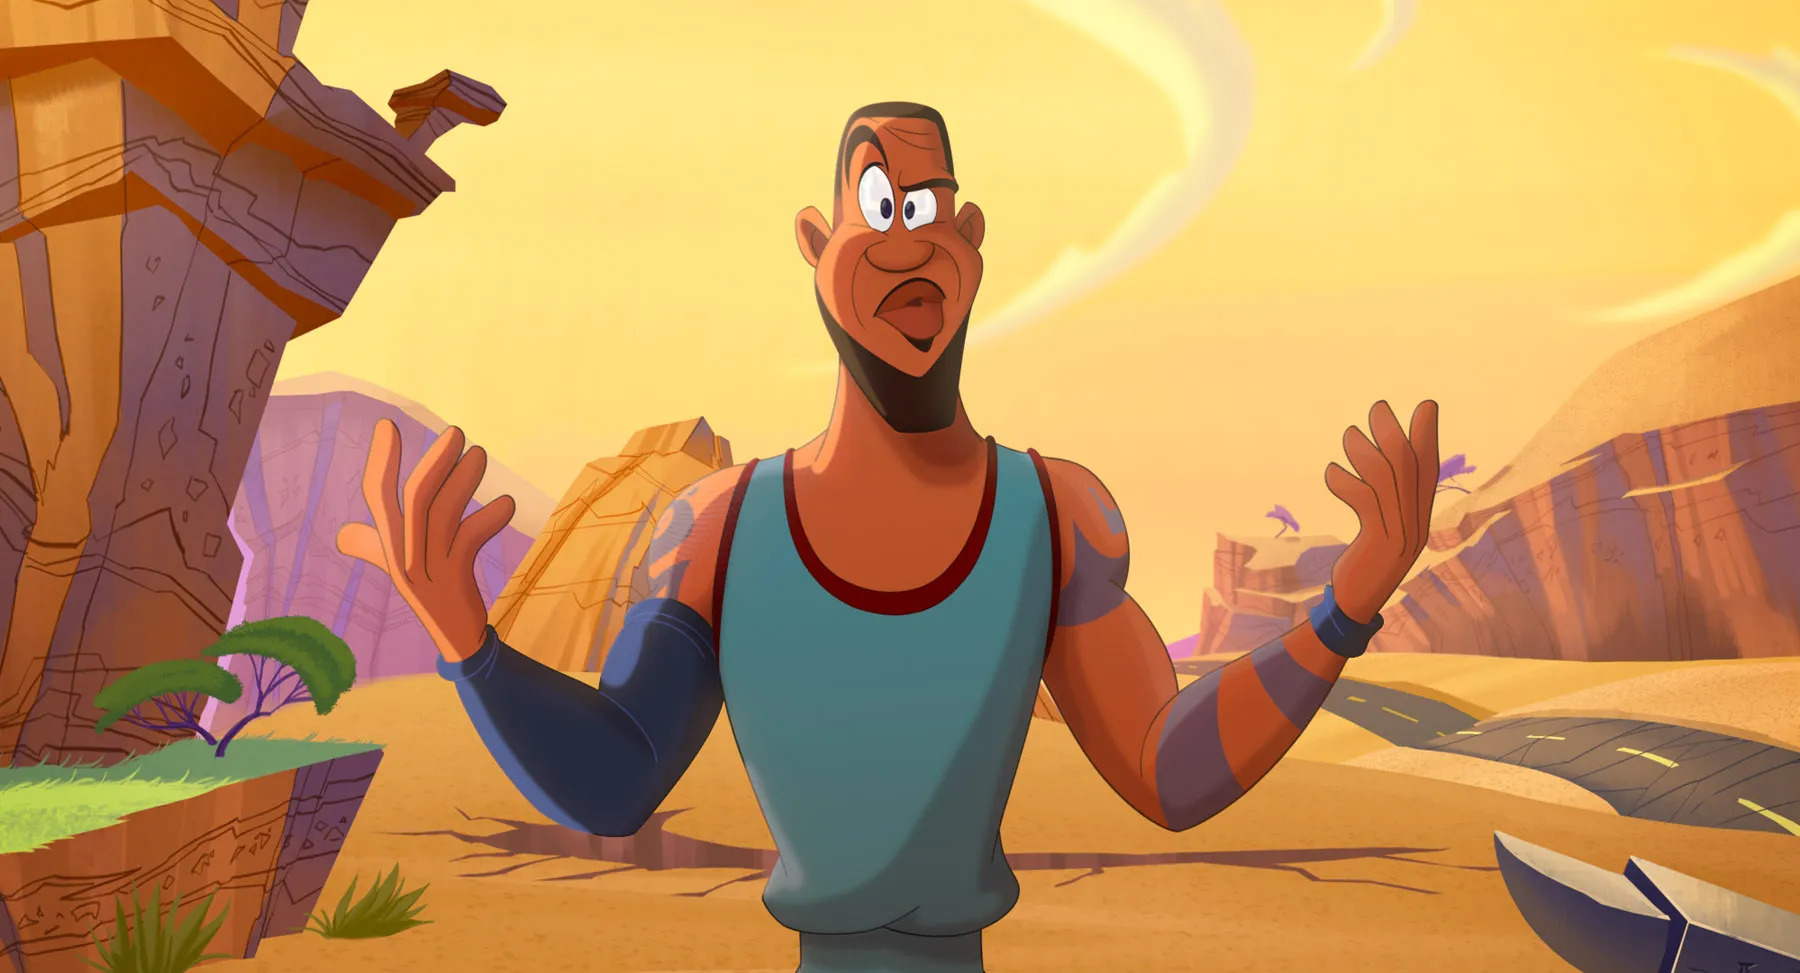 A cartoonish LeBron James looks confused in a still from Space Jam: A New Legacy